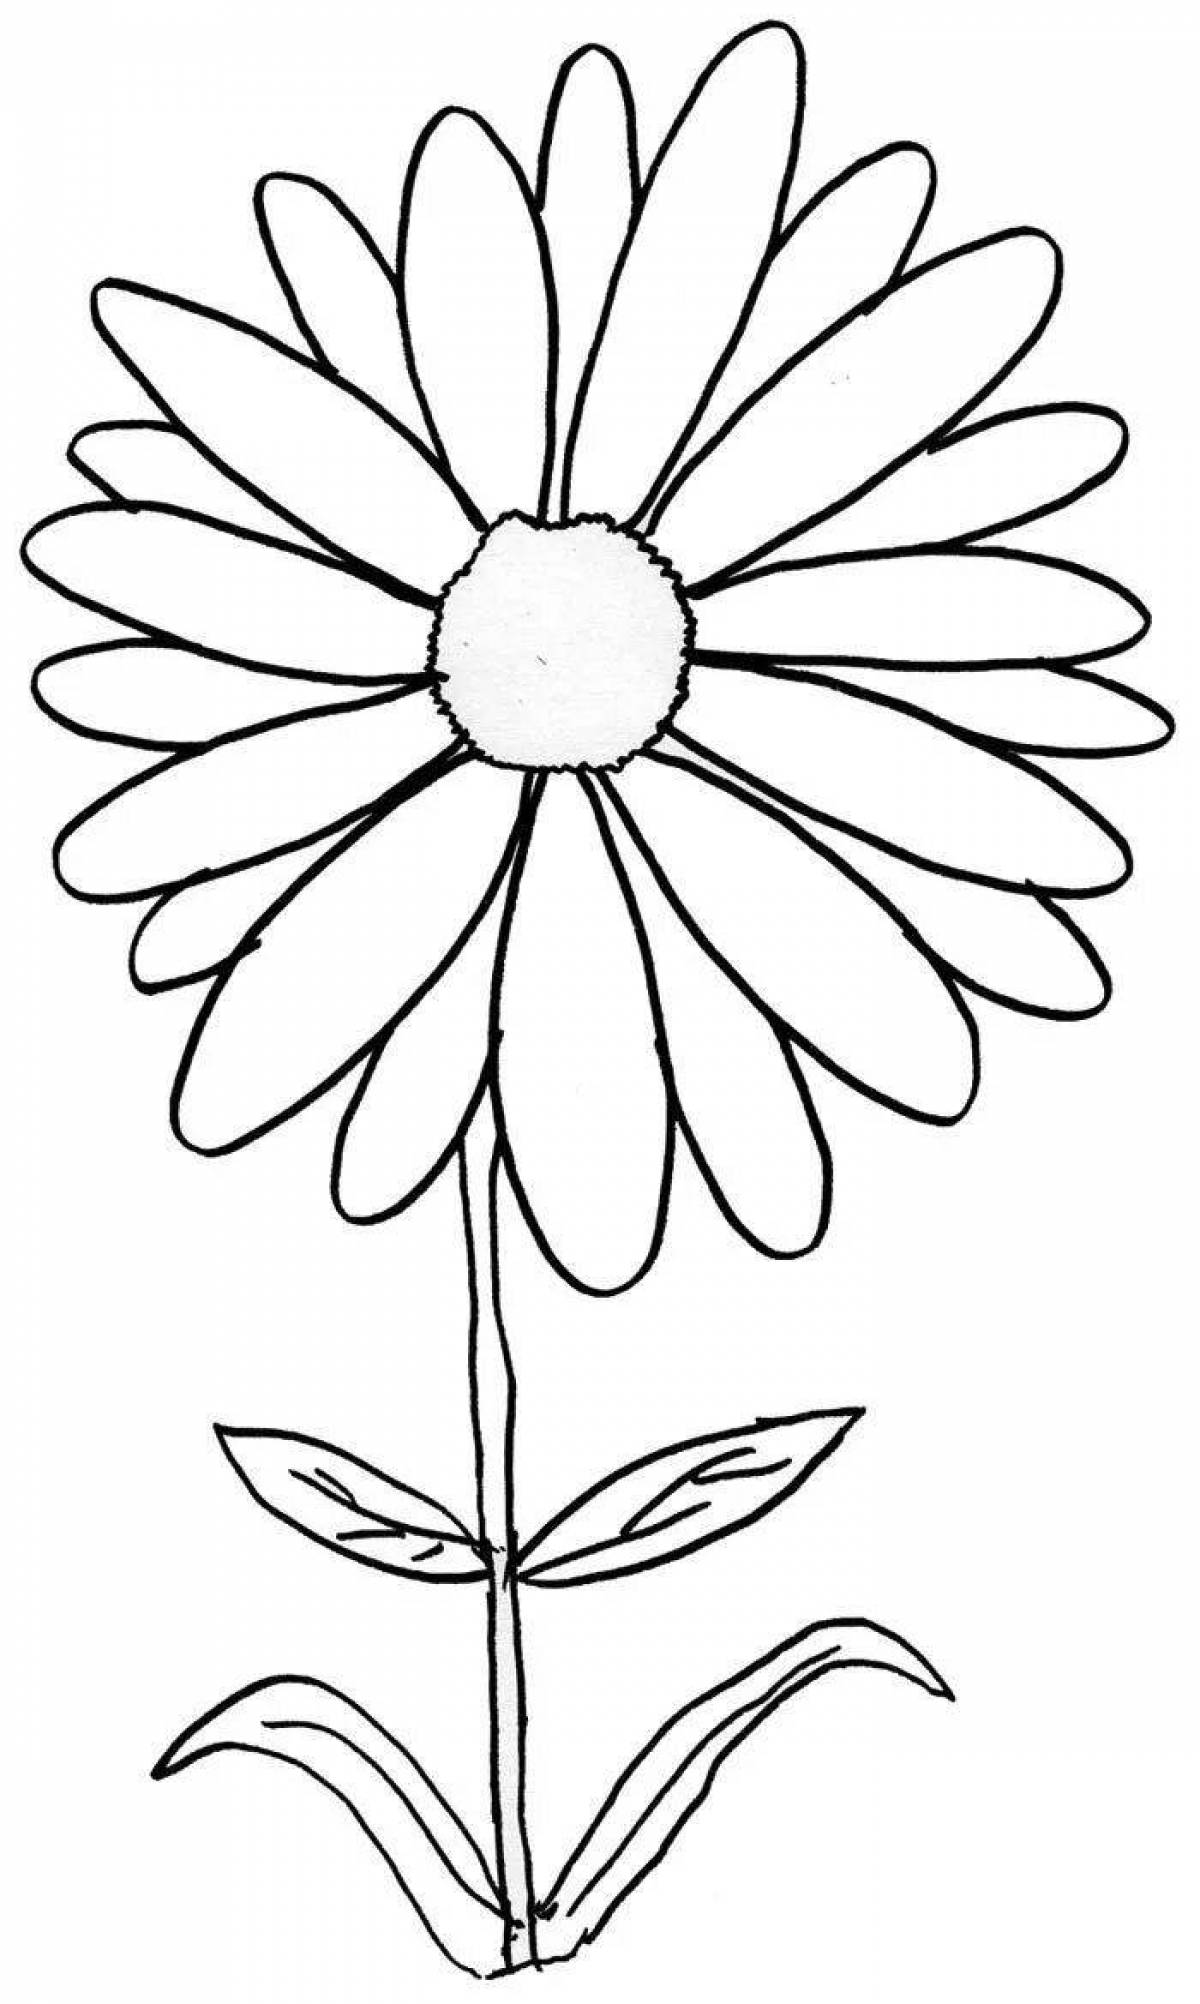 Inspirational chamomile flower coloring book